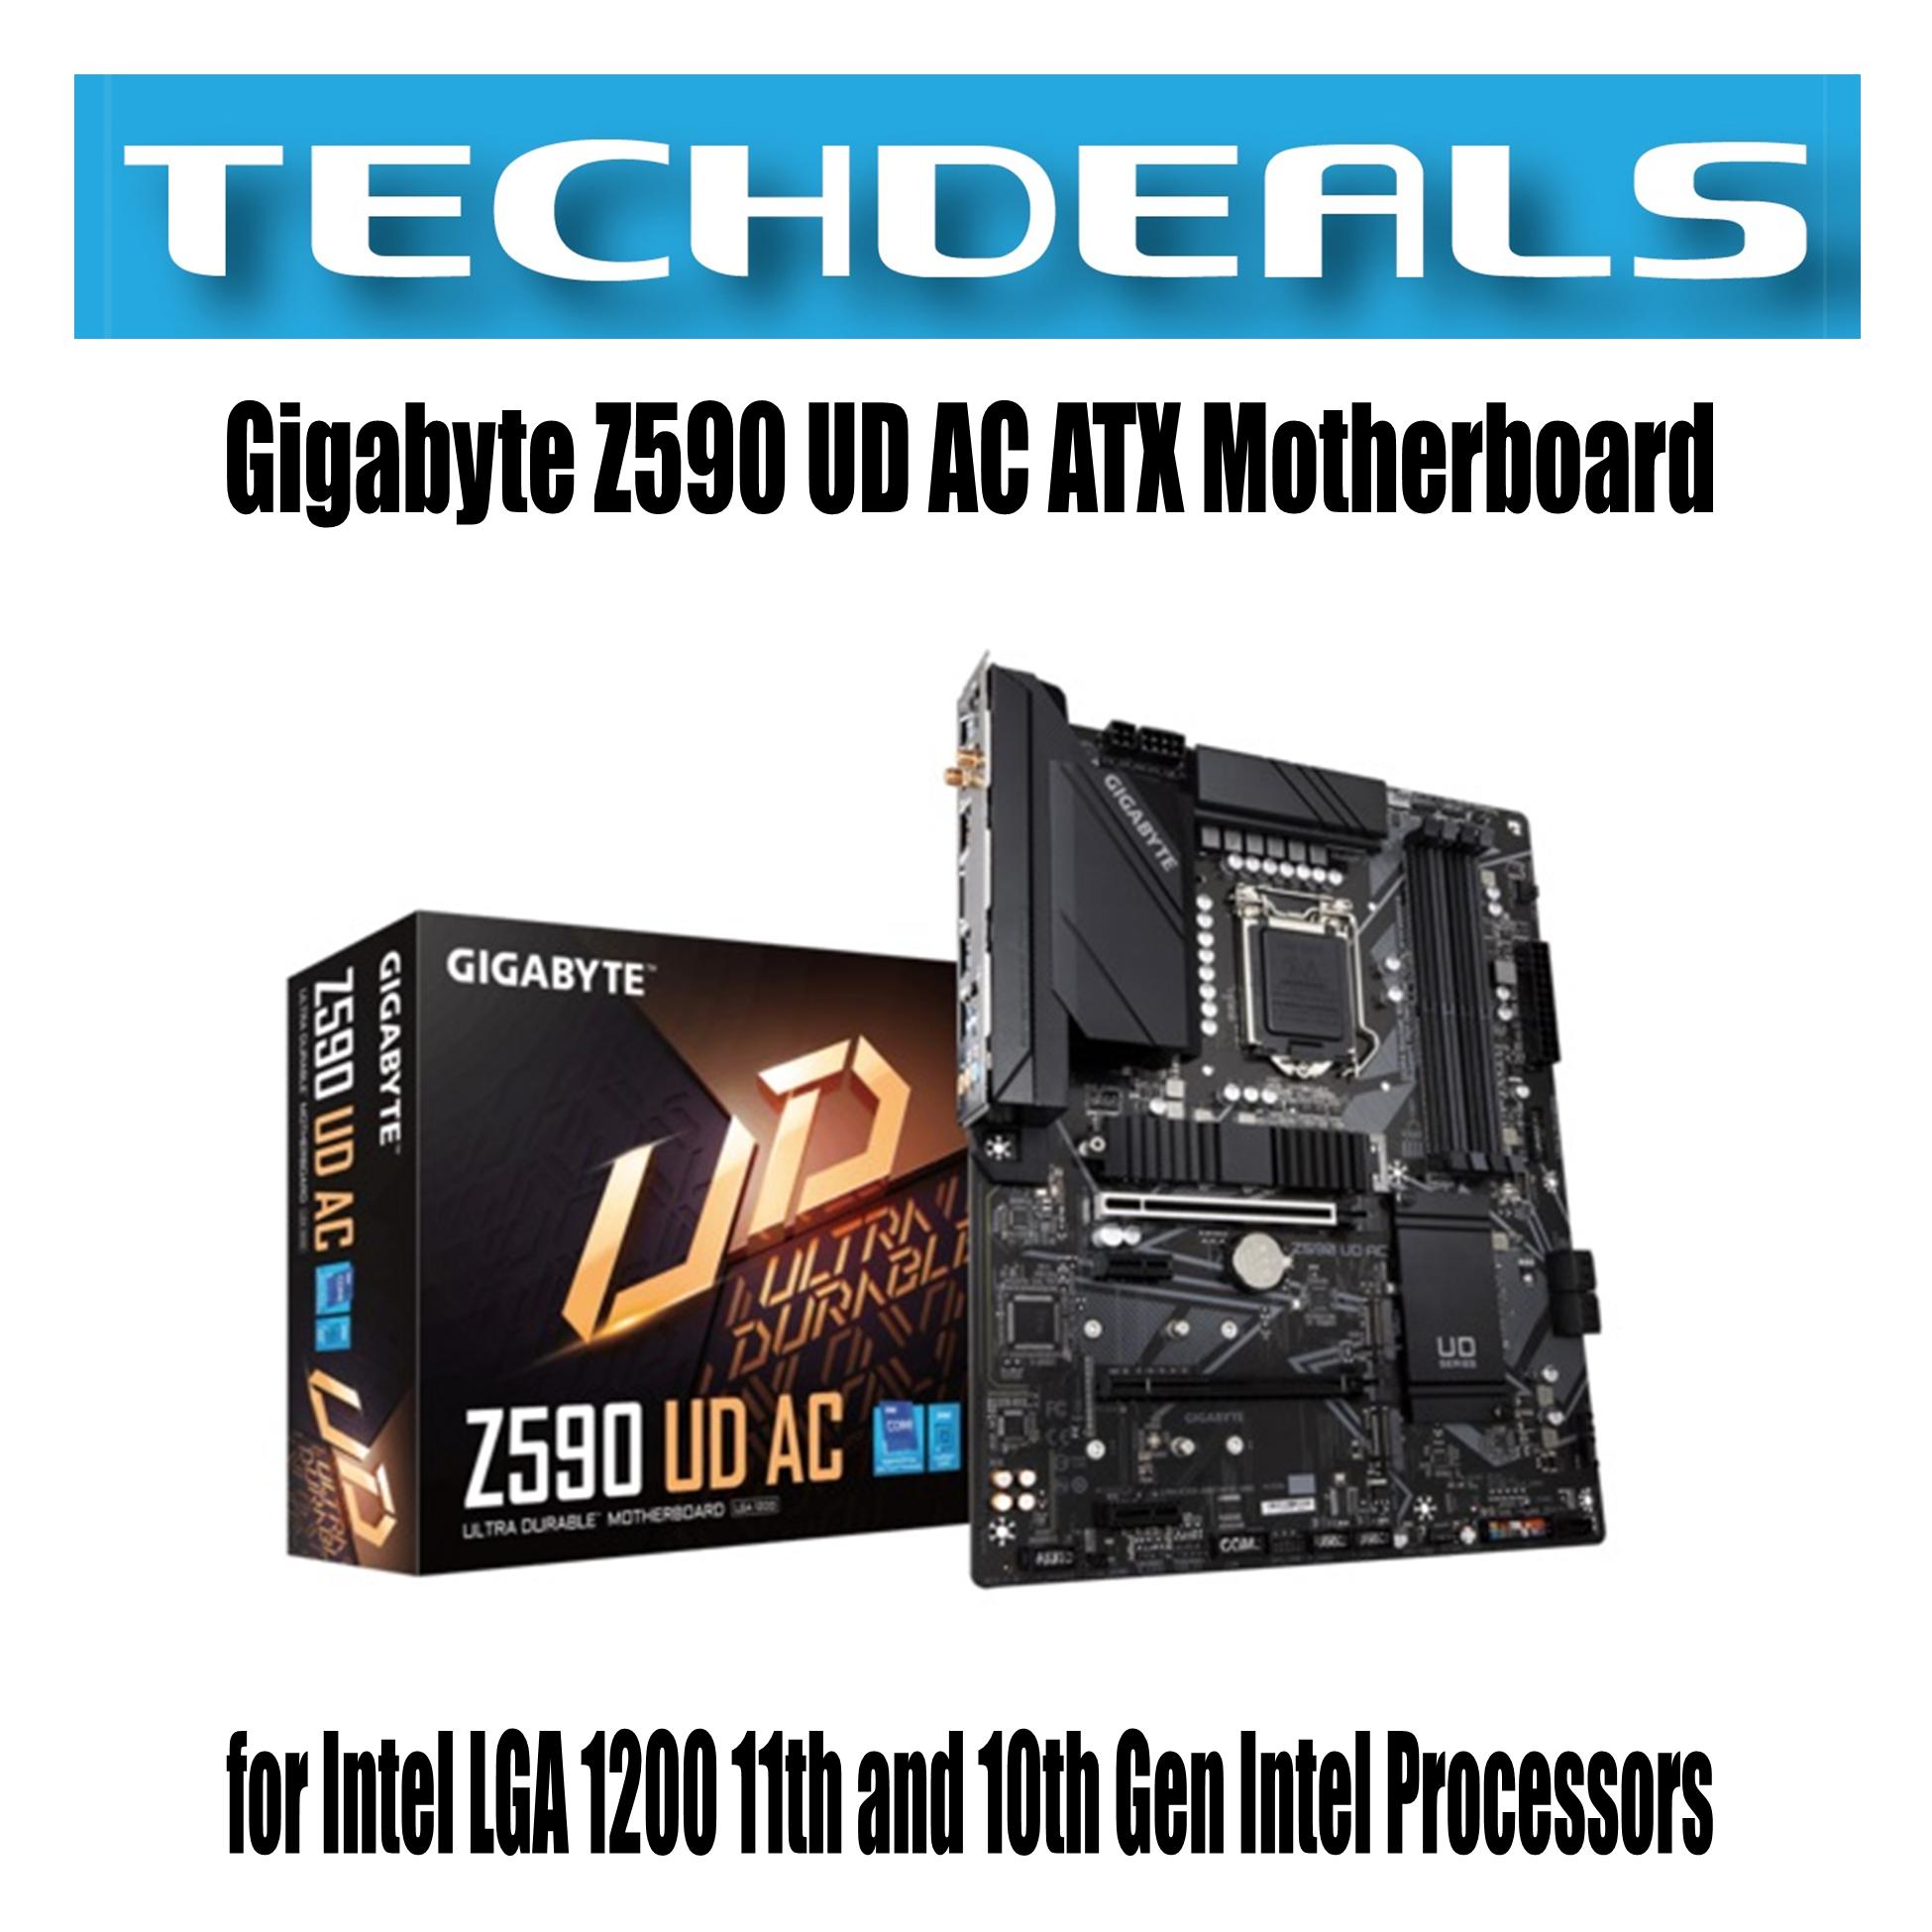 Gigabyte Z590 UD AC ATX Motherboard for Intel LGA 1200 11th and